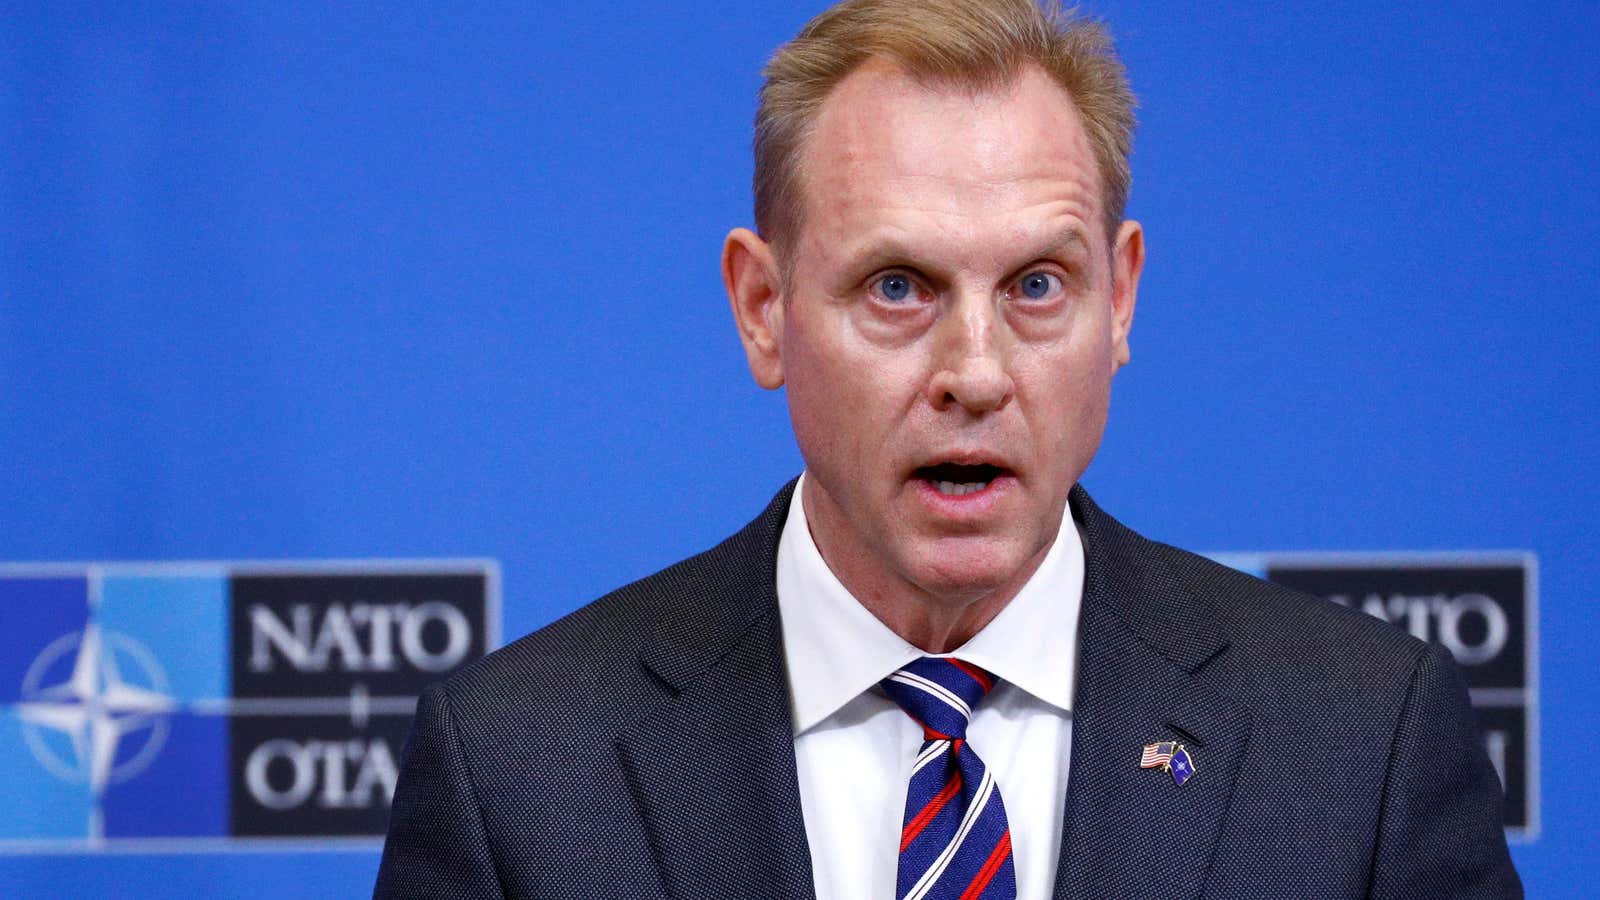 “I’m not required to do anything” acting defense secretary Patrick Shanahan told reporters.